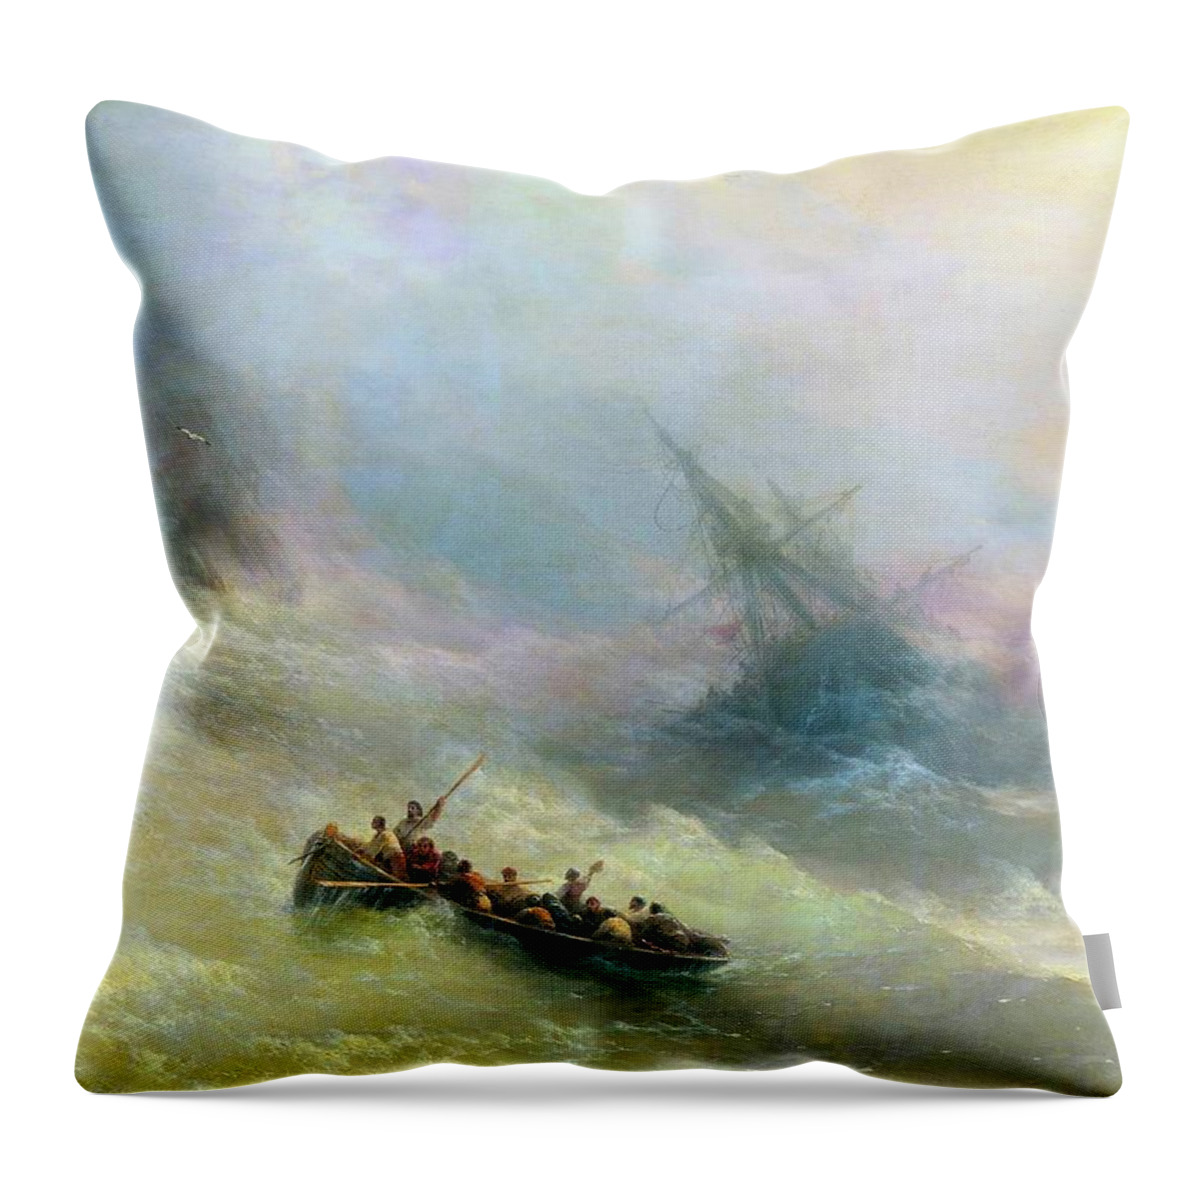 Rainbow Throw Pillow featuring the painting Rainbow Ivan Aivazovsky 1873 by Movie Poster Prints